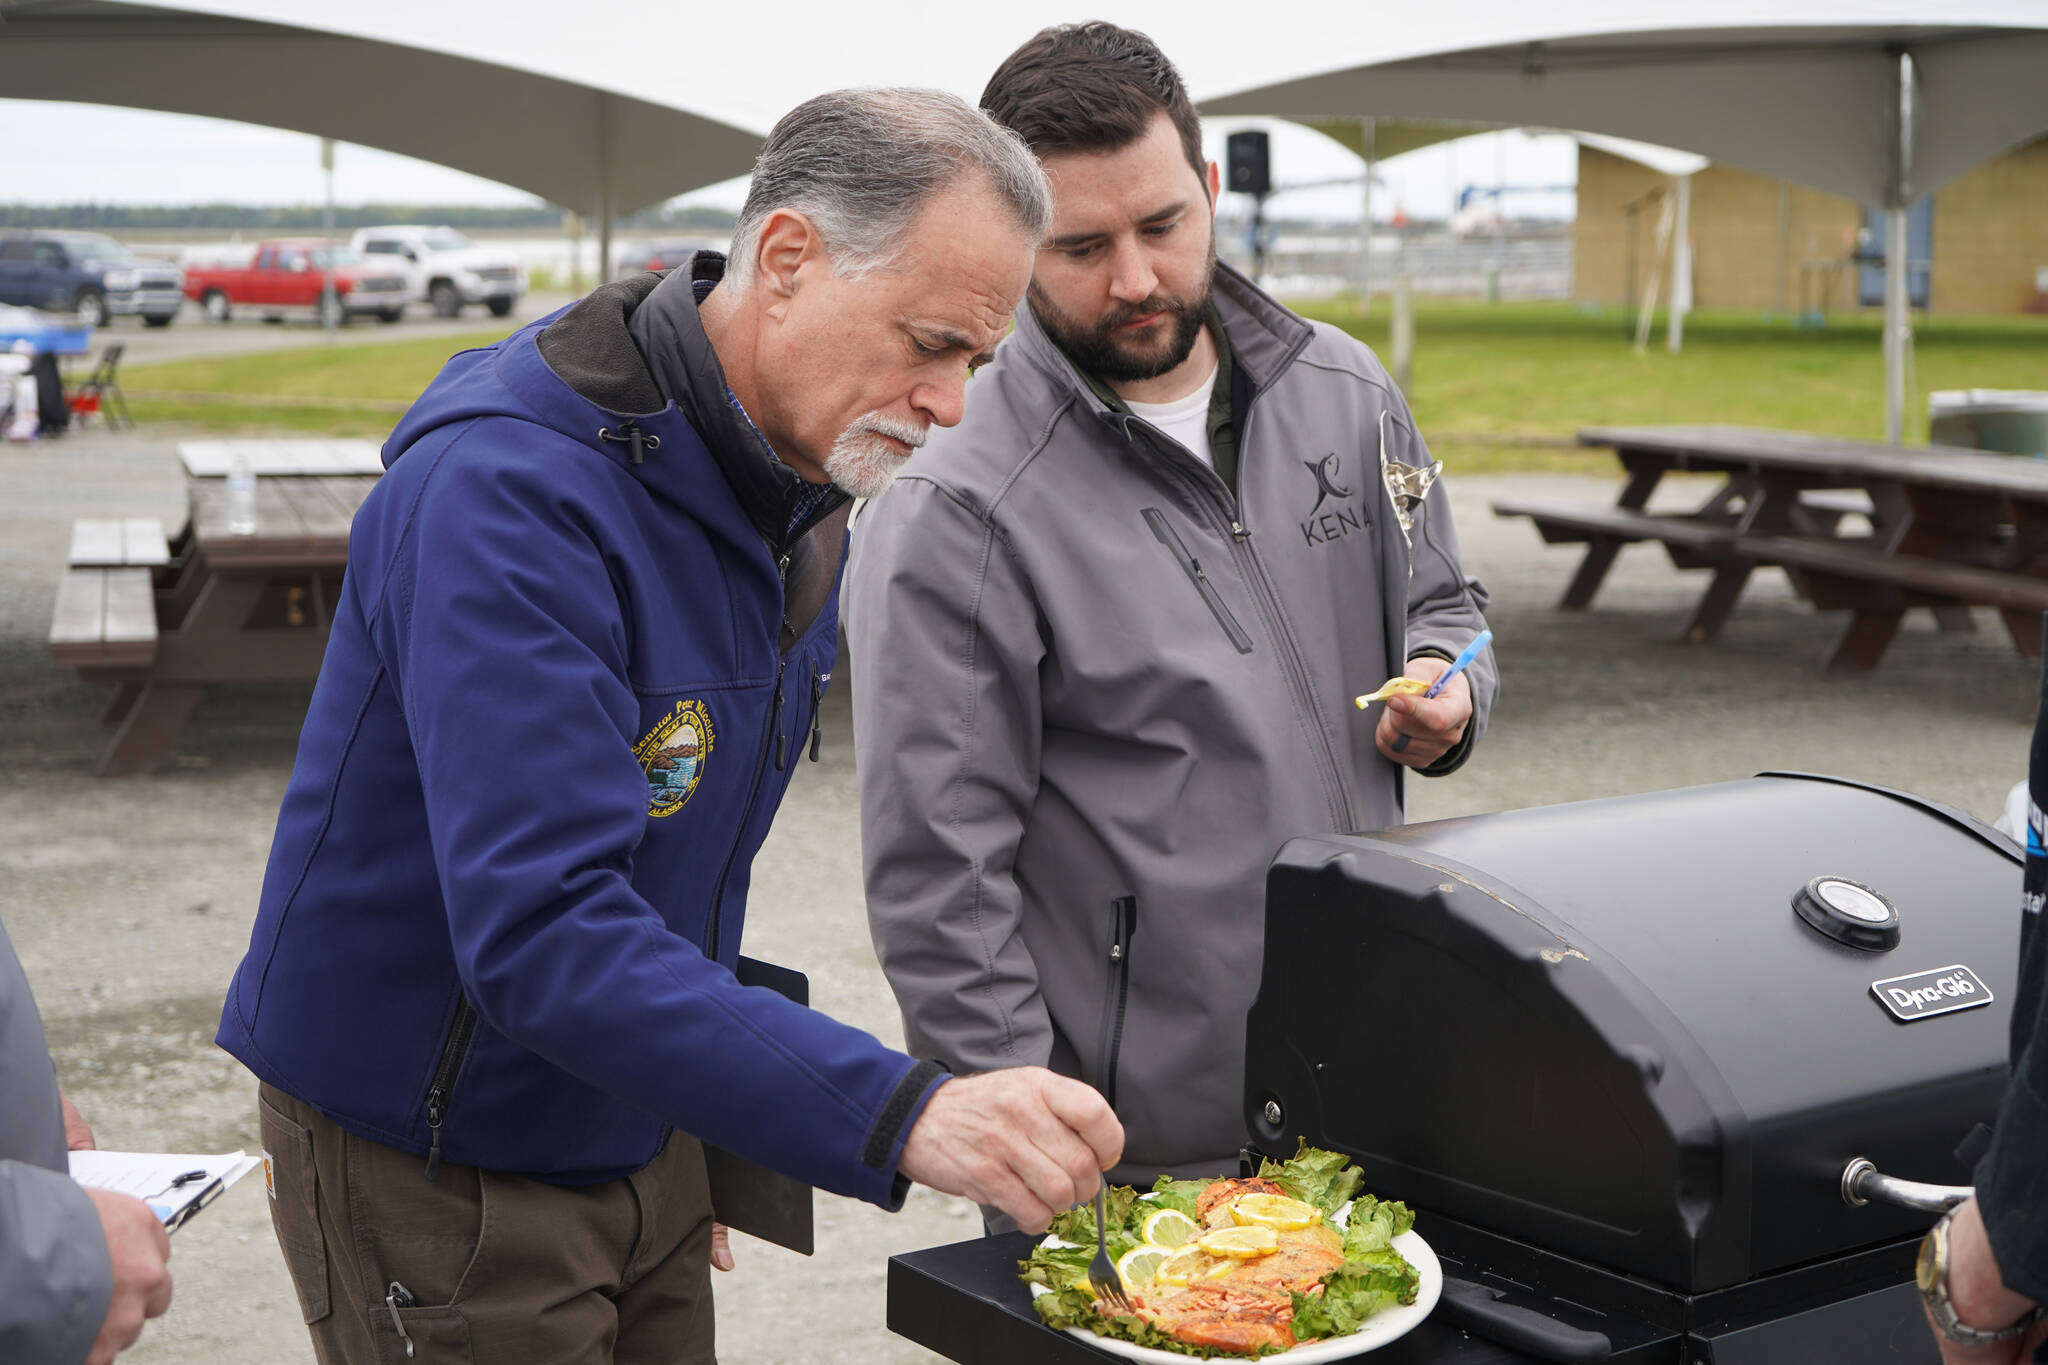 Judges Peter Micciche and Tyler Best sample a salmon dish prepared by chef Lastan Williams of The Catch at Return of the Reds on Saturday, June 3, 2023, at the Kenai City Dock in Kenai, Alaska. (Jake Dye/Peninsula Clarion)